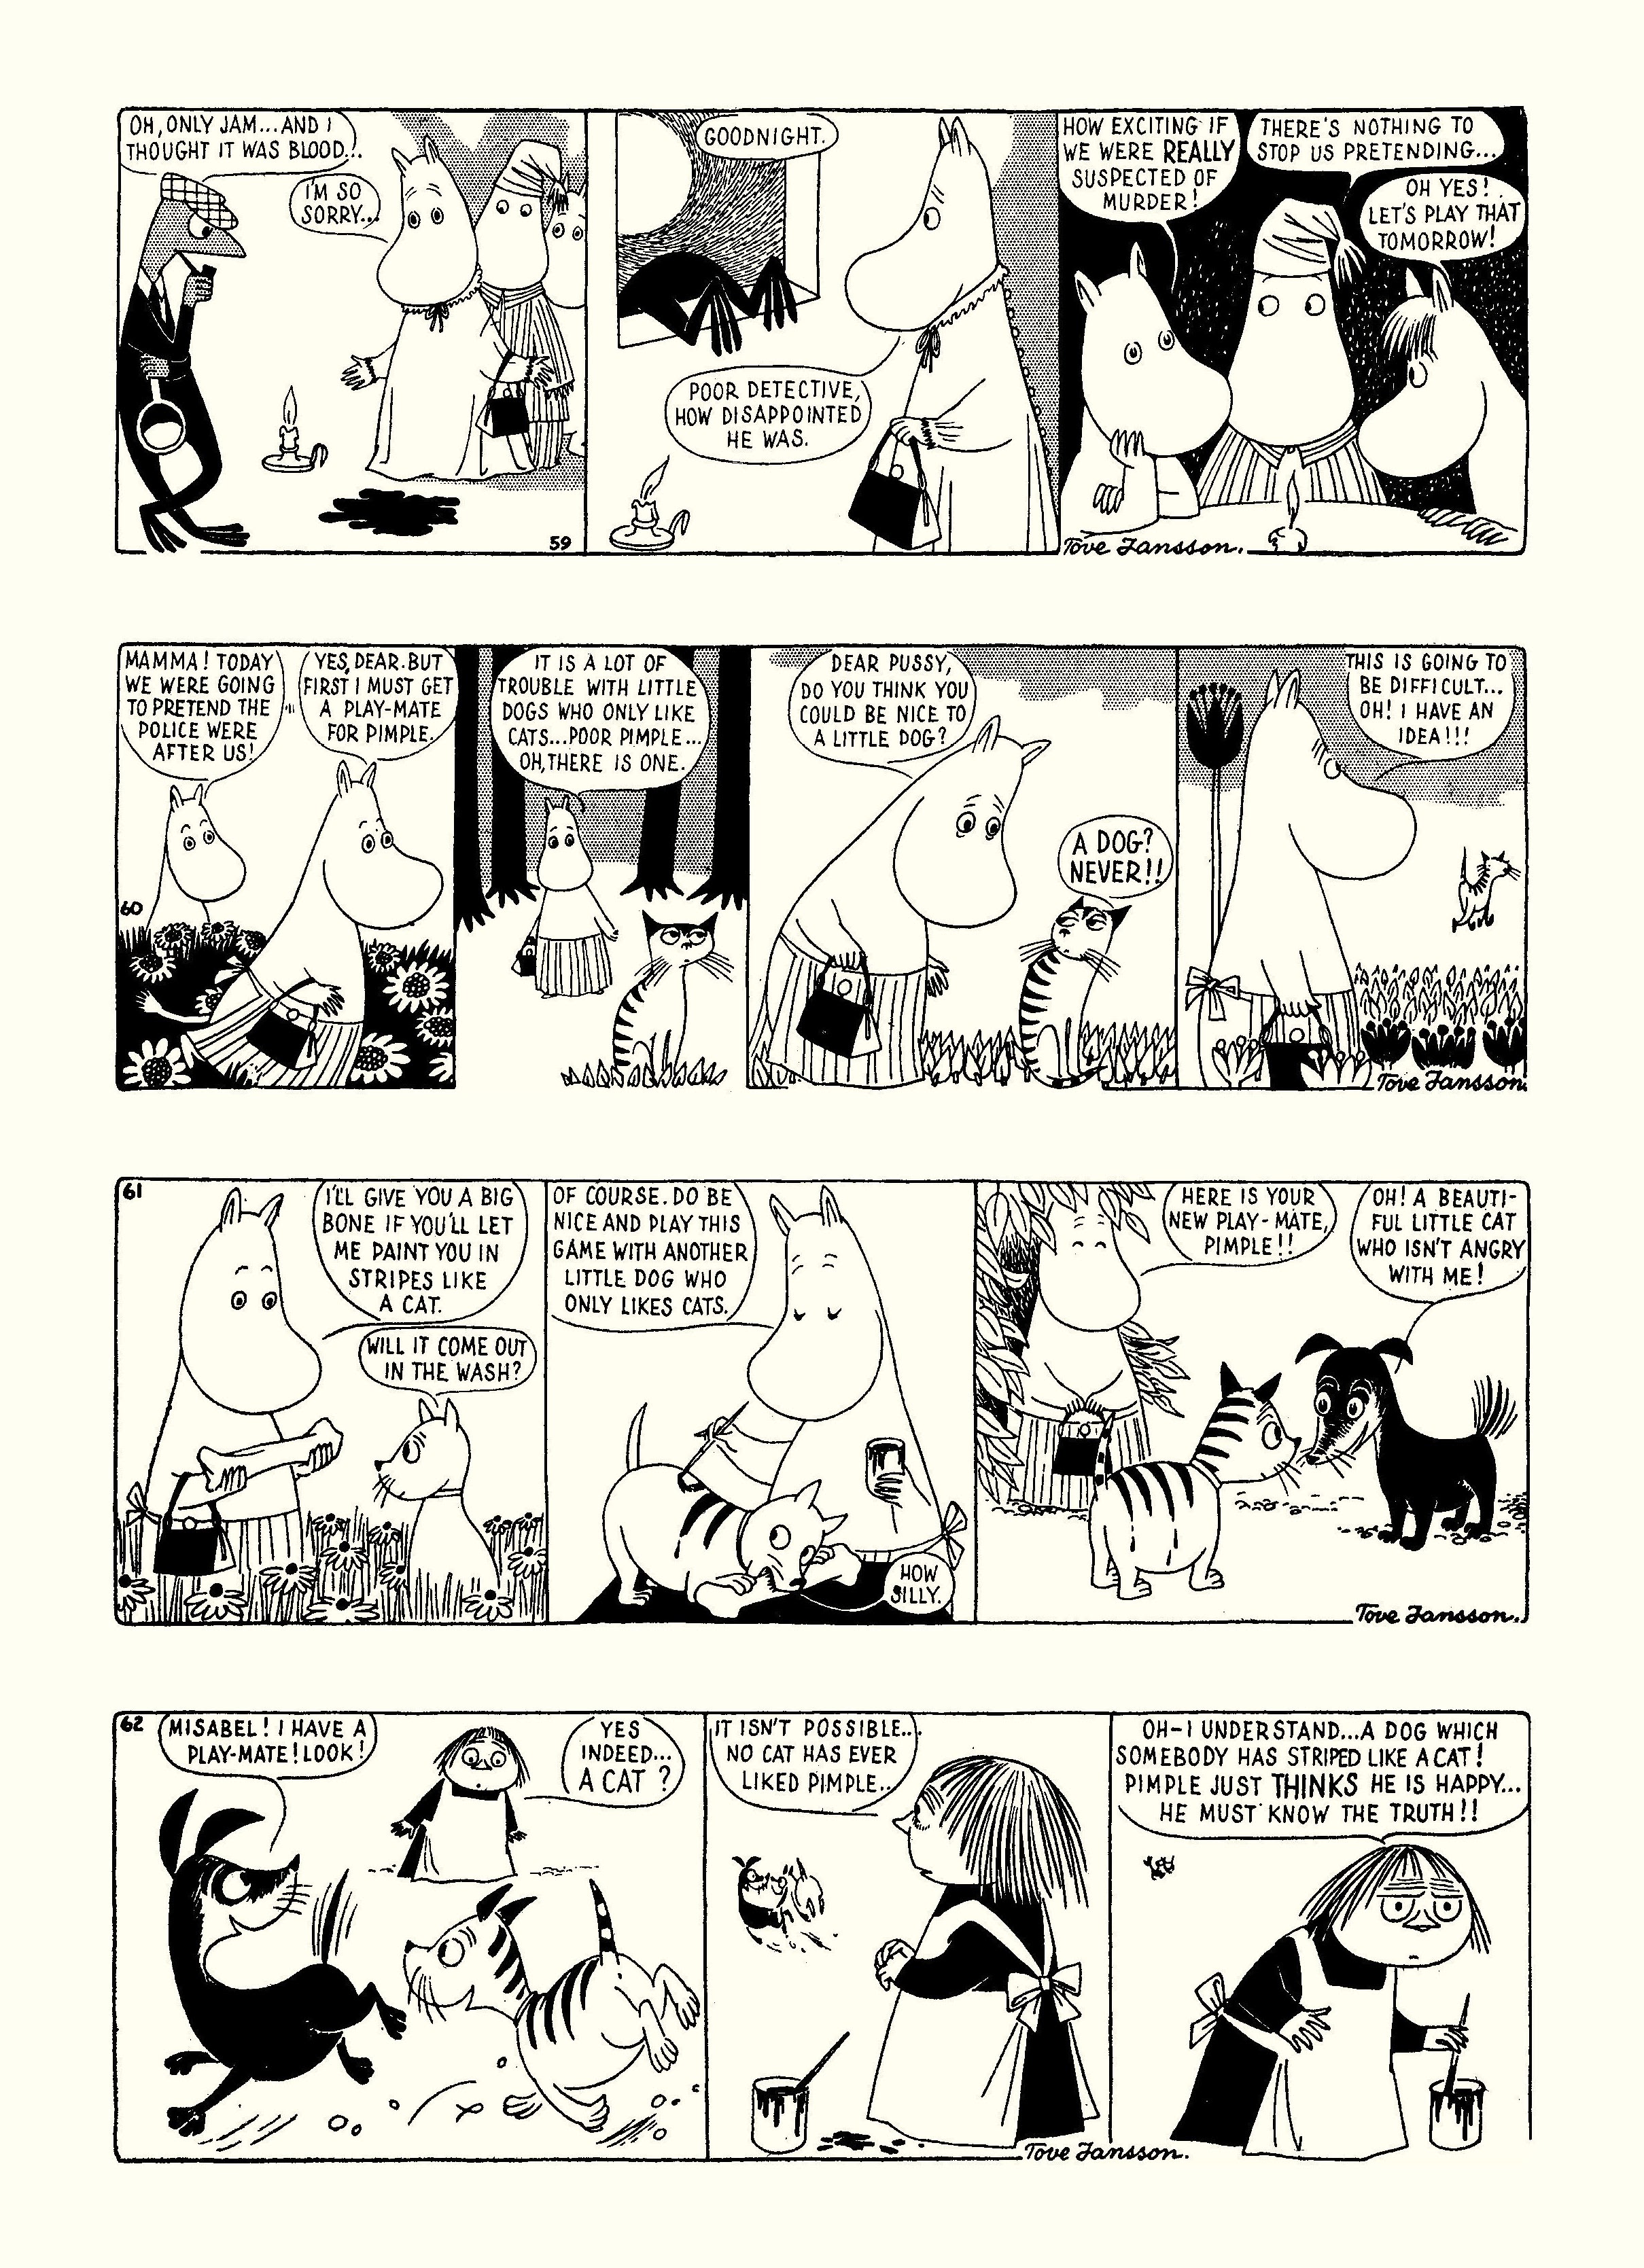 Read online Moomin: The Complete Tove Jansson Comic Strip comic -  Issue # TPB 2 - 42